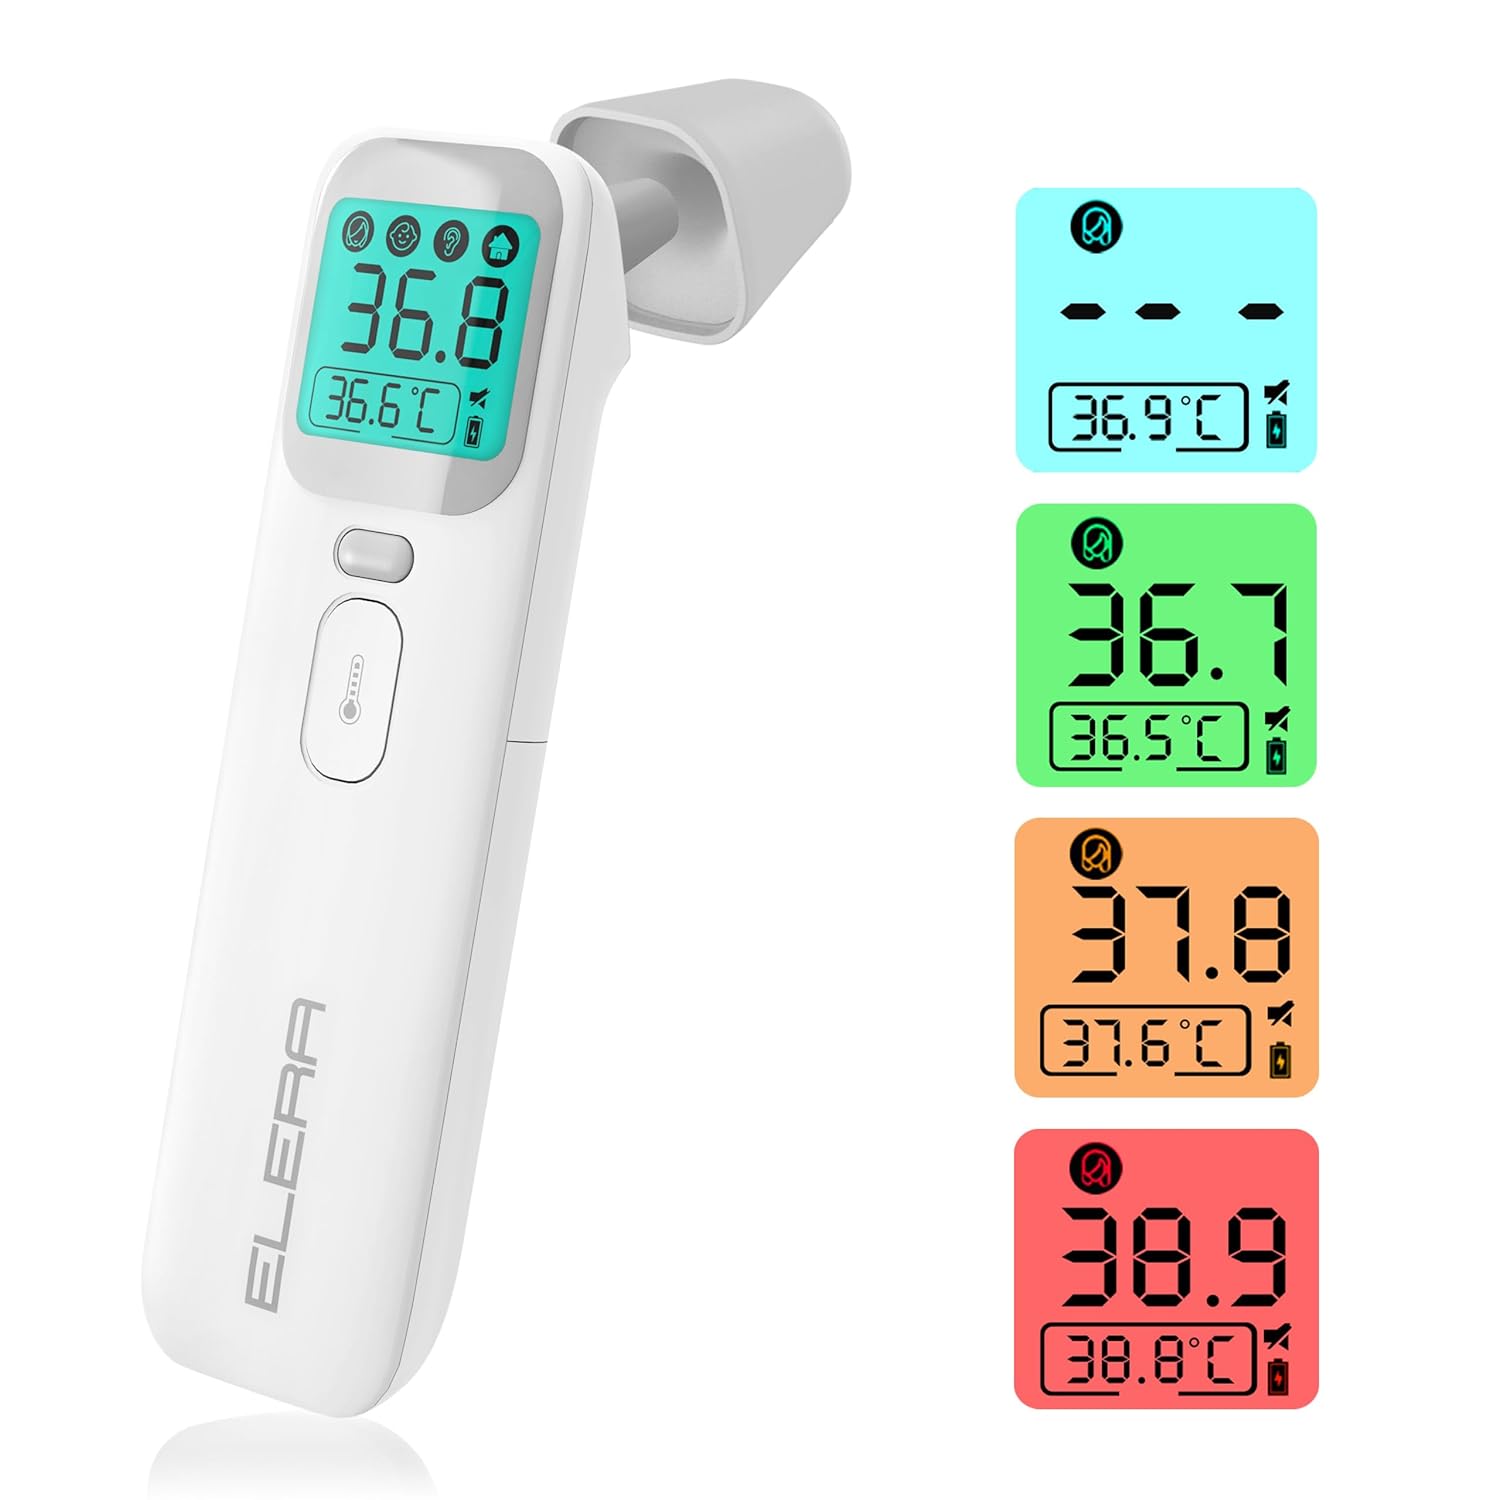 ELERA Baby Thermometer – Ear Thermometer for Kids, Infants, and Adults, Digital Precision with Quick 1-Second Measurement, 4-in-1 Non-Contact Design with Memory Function